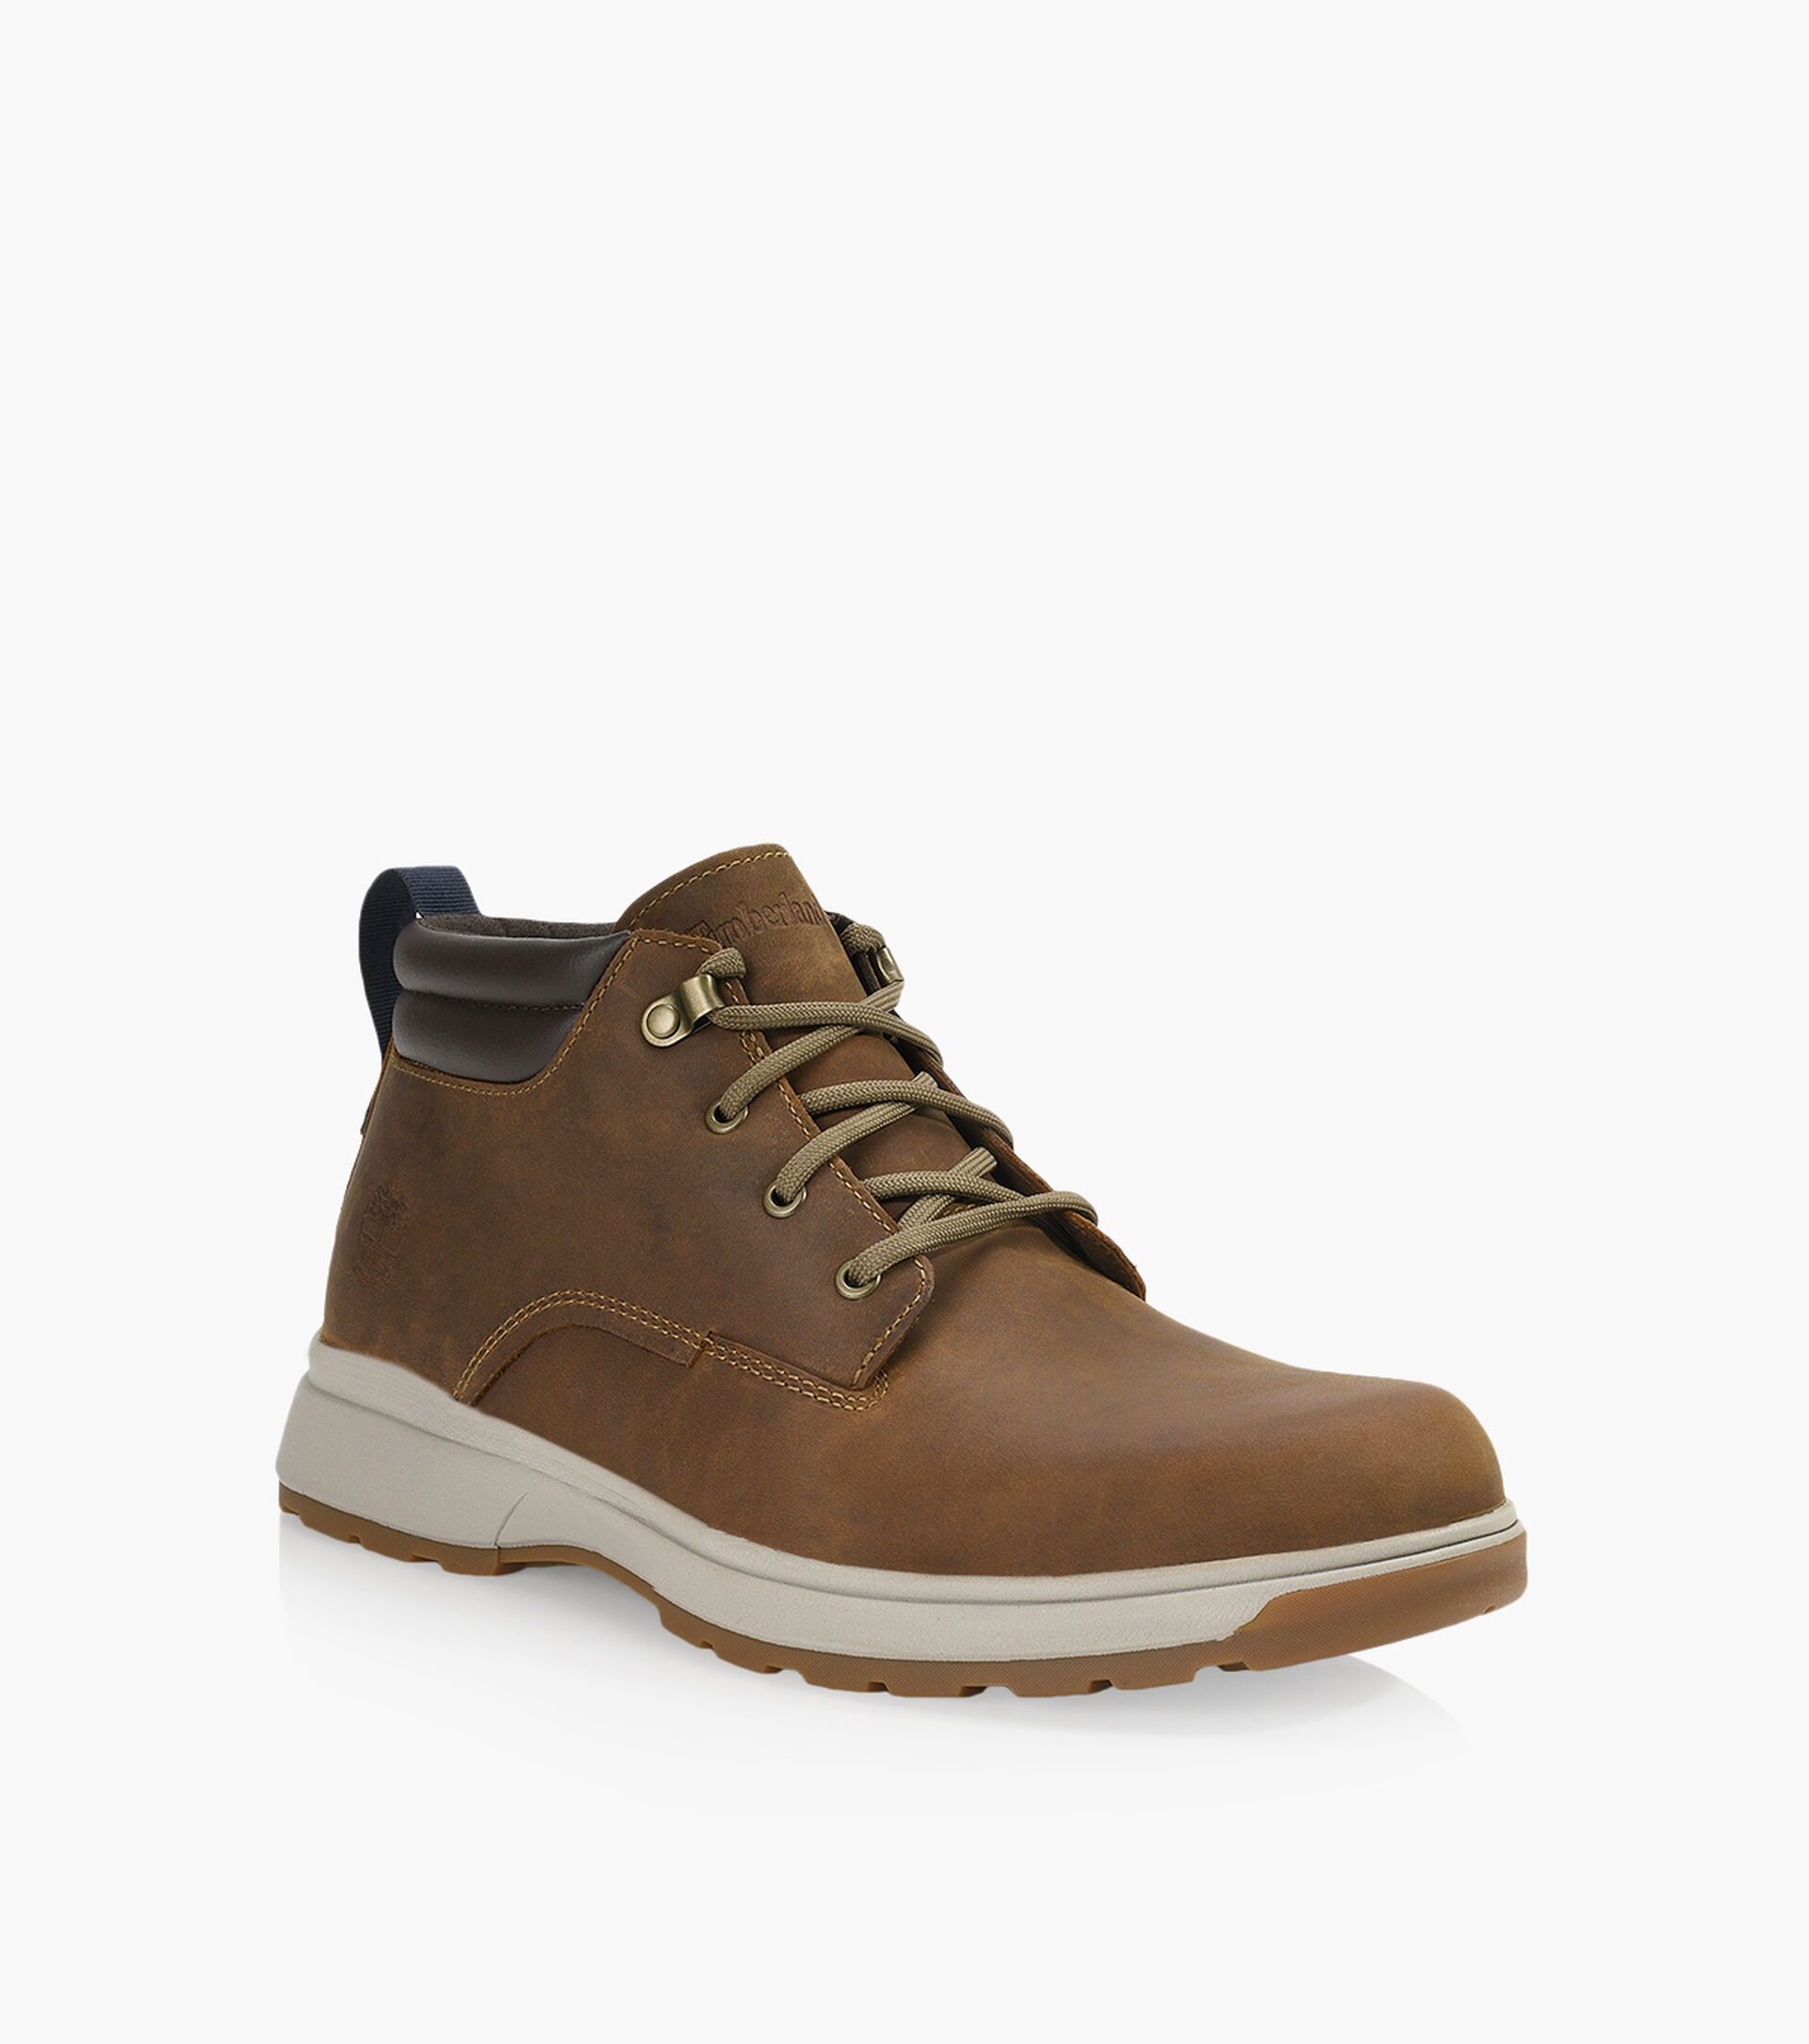 grot Sneeuwwitje ontsnappen TIMBERLAND ATWELLS AVE CHUKKA - Leather | Browns Shoes